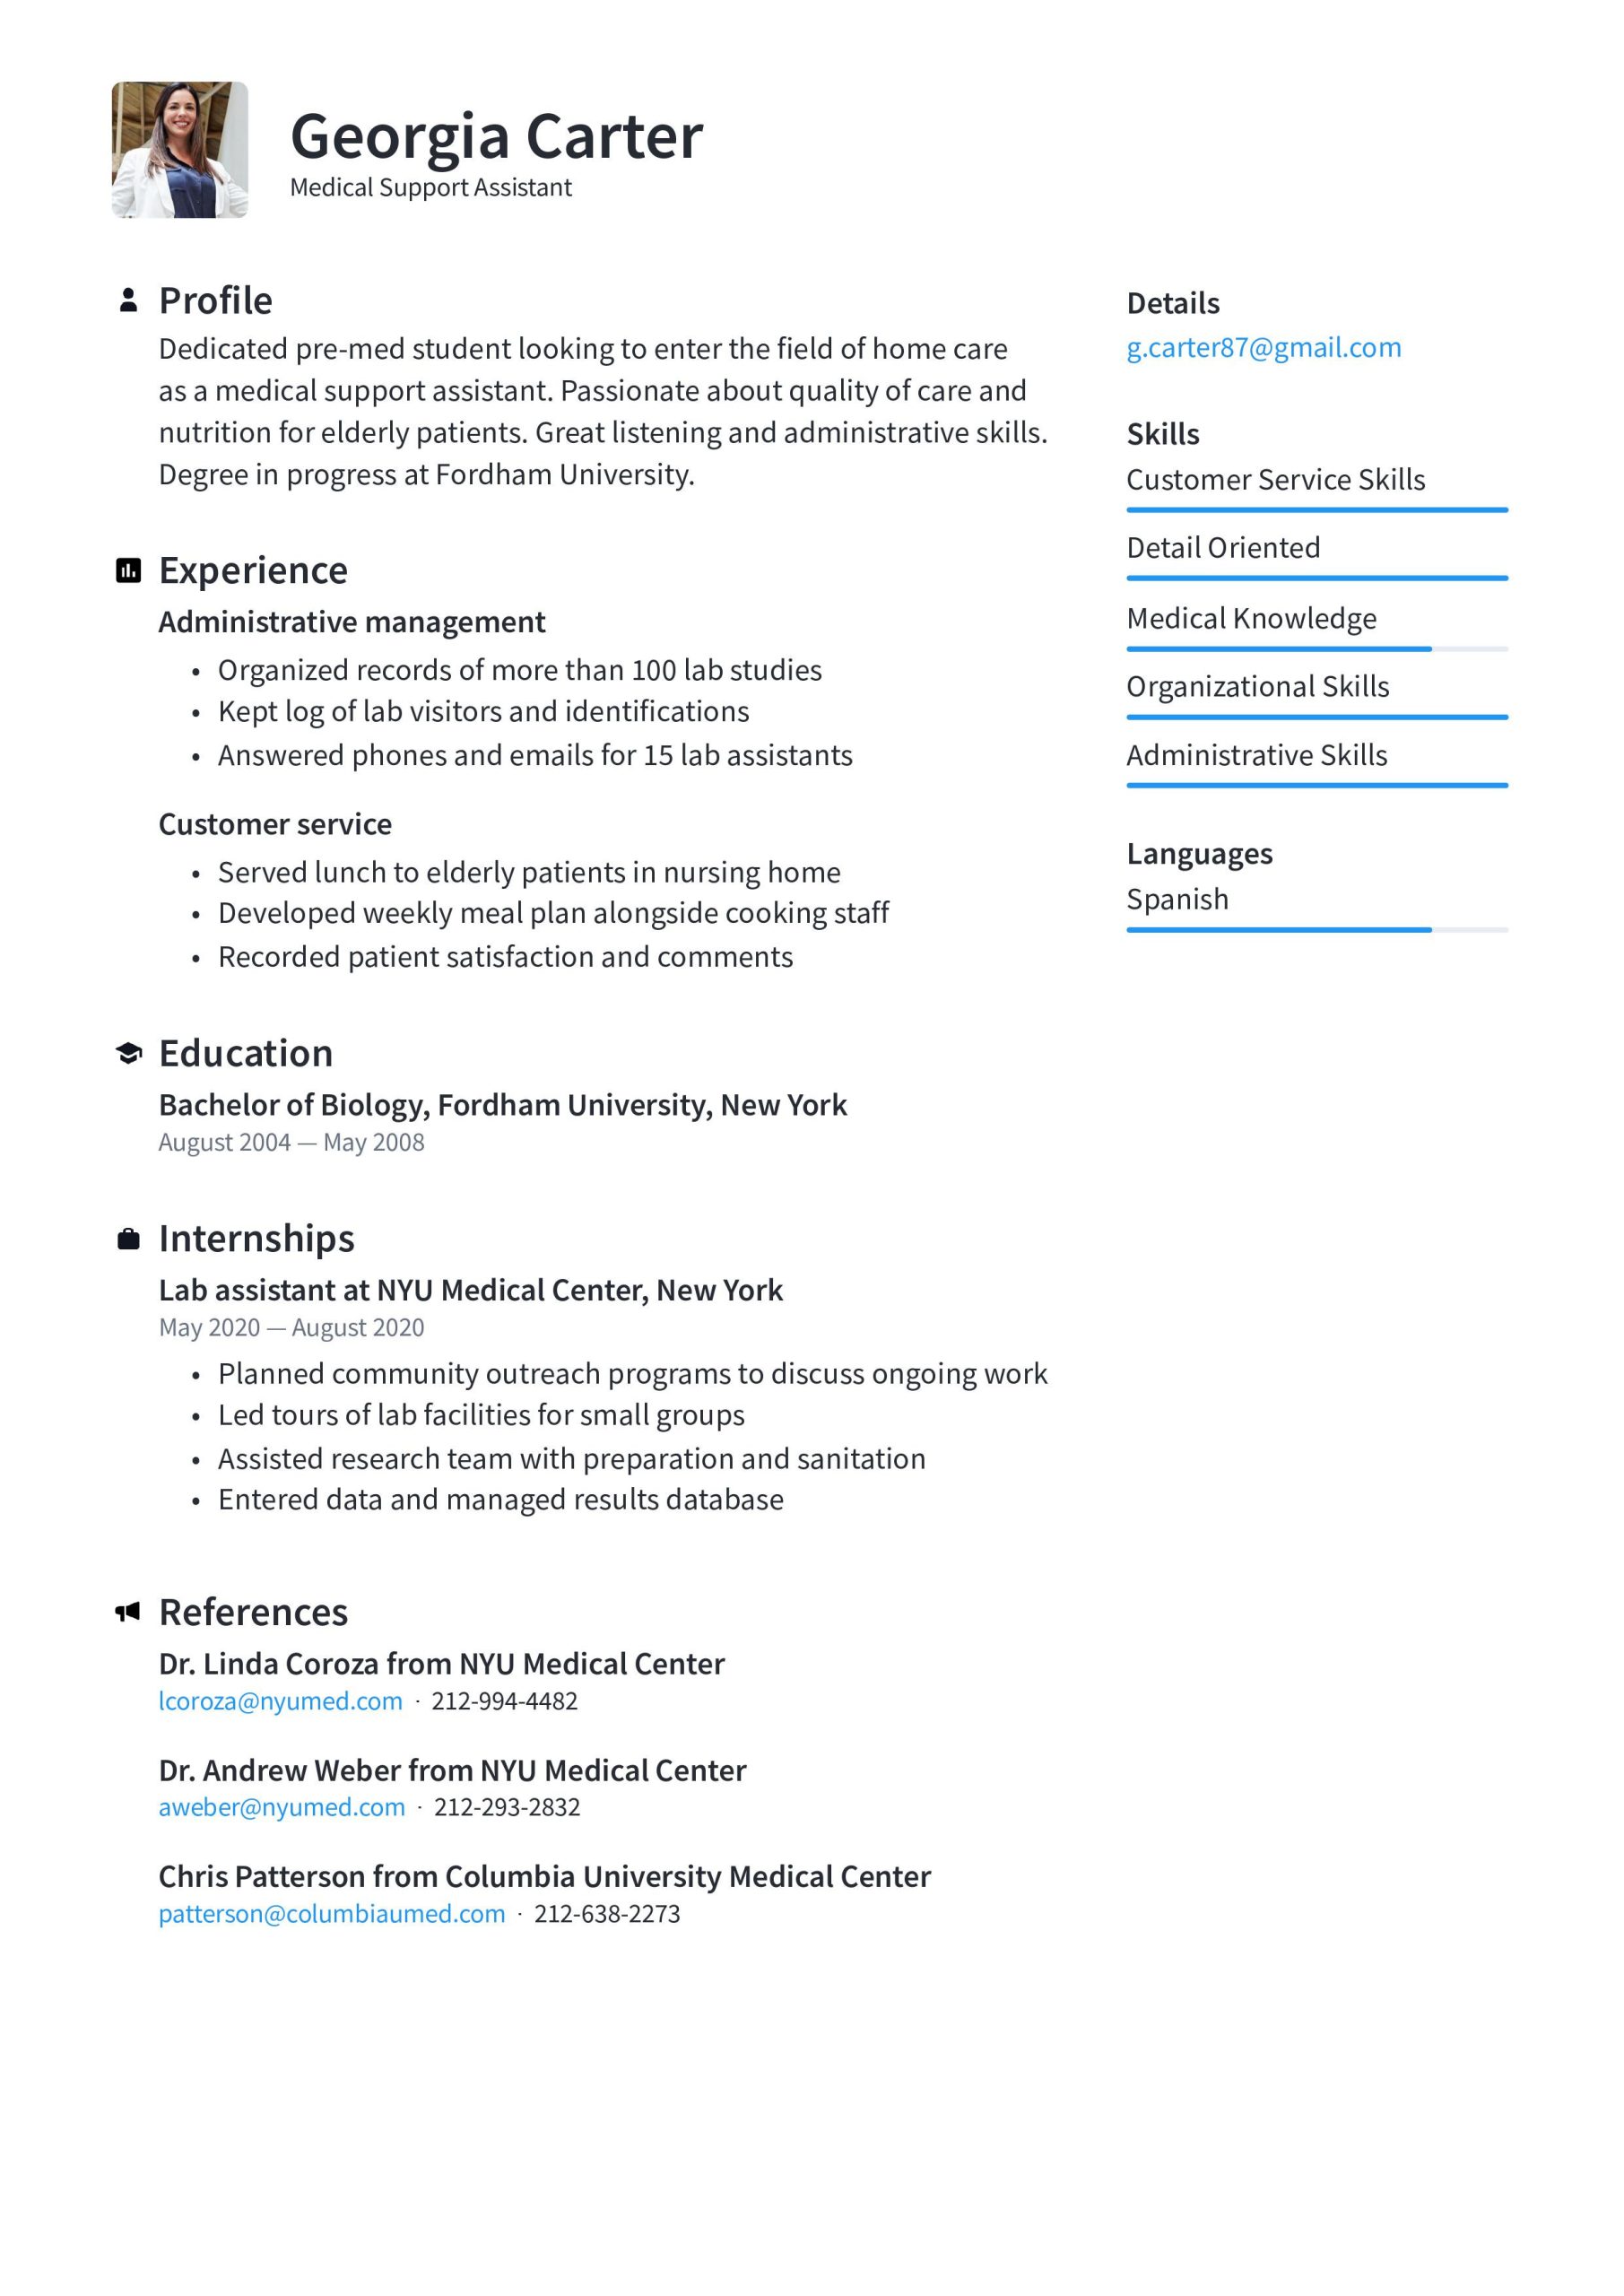 Samples Of Functional Resumes with Objectives Functional Resume format: Examples, Tips, & Free Templates